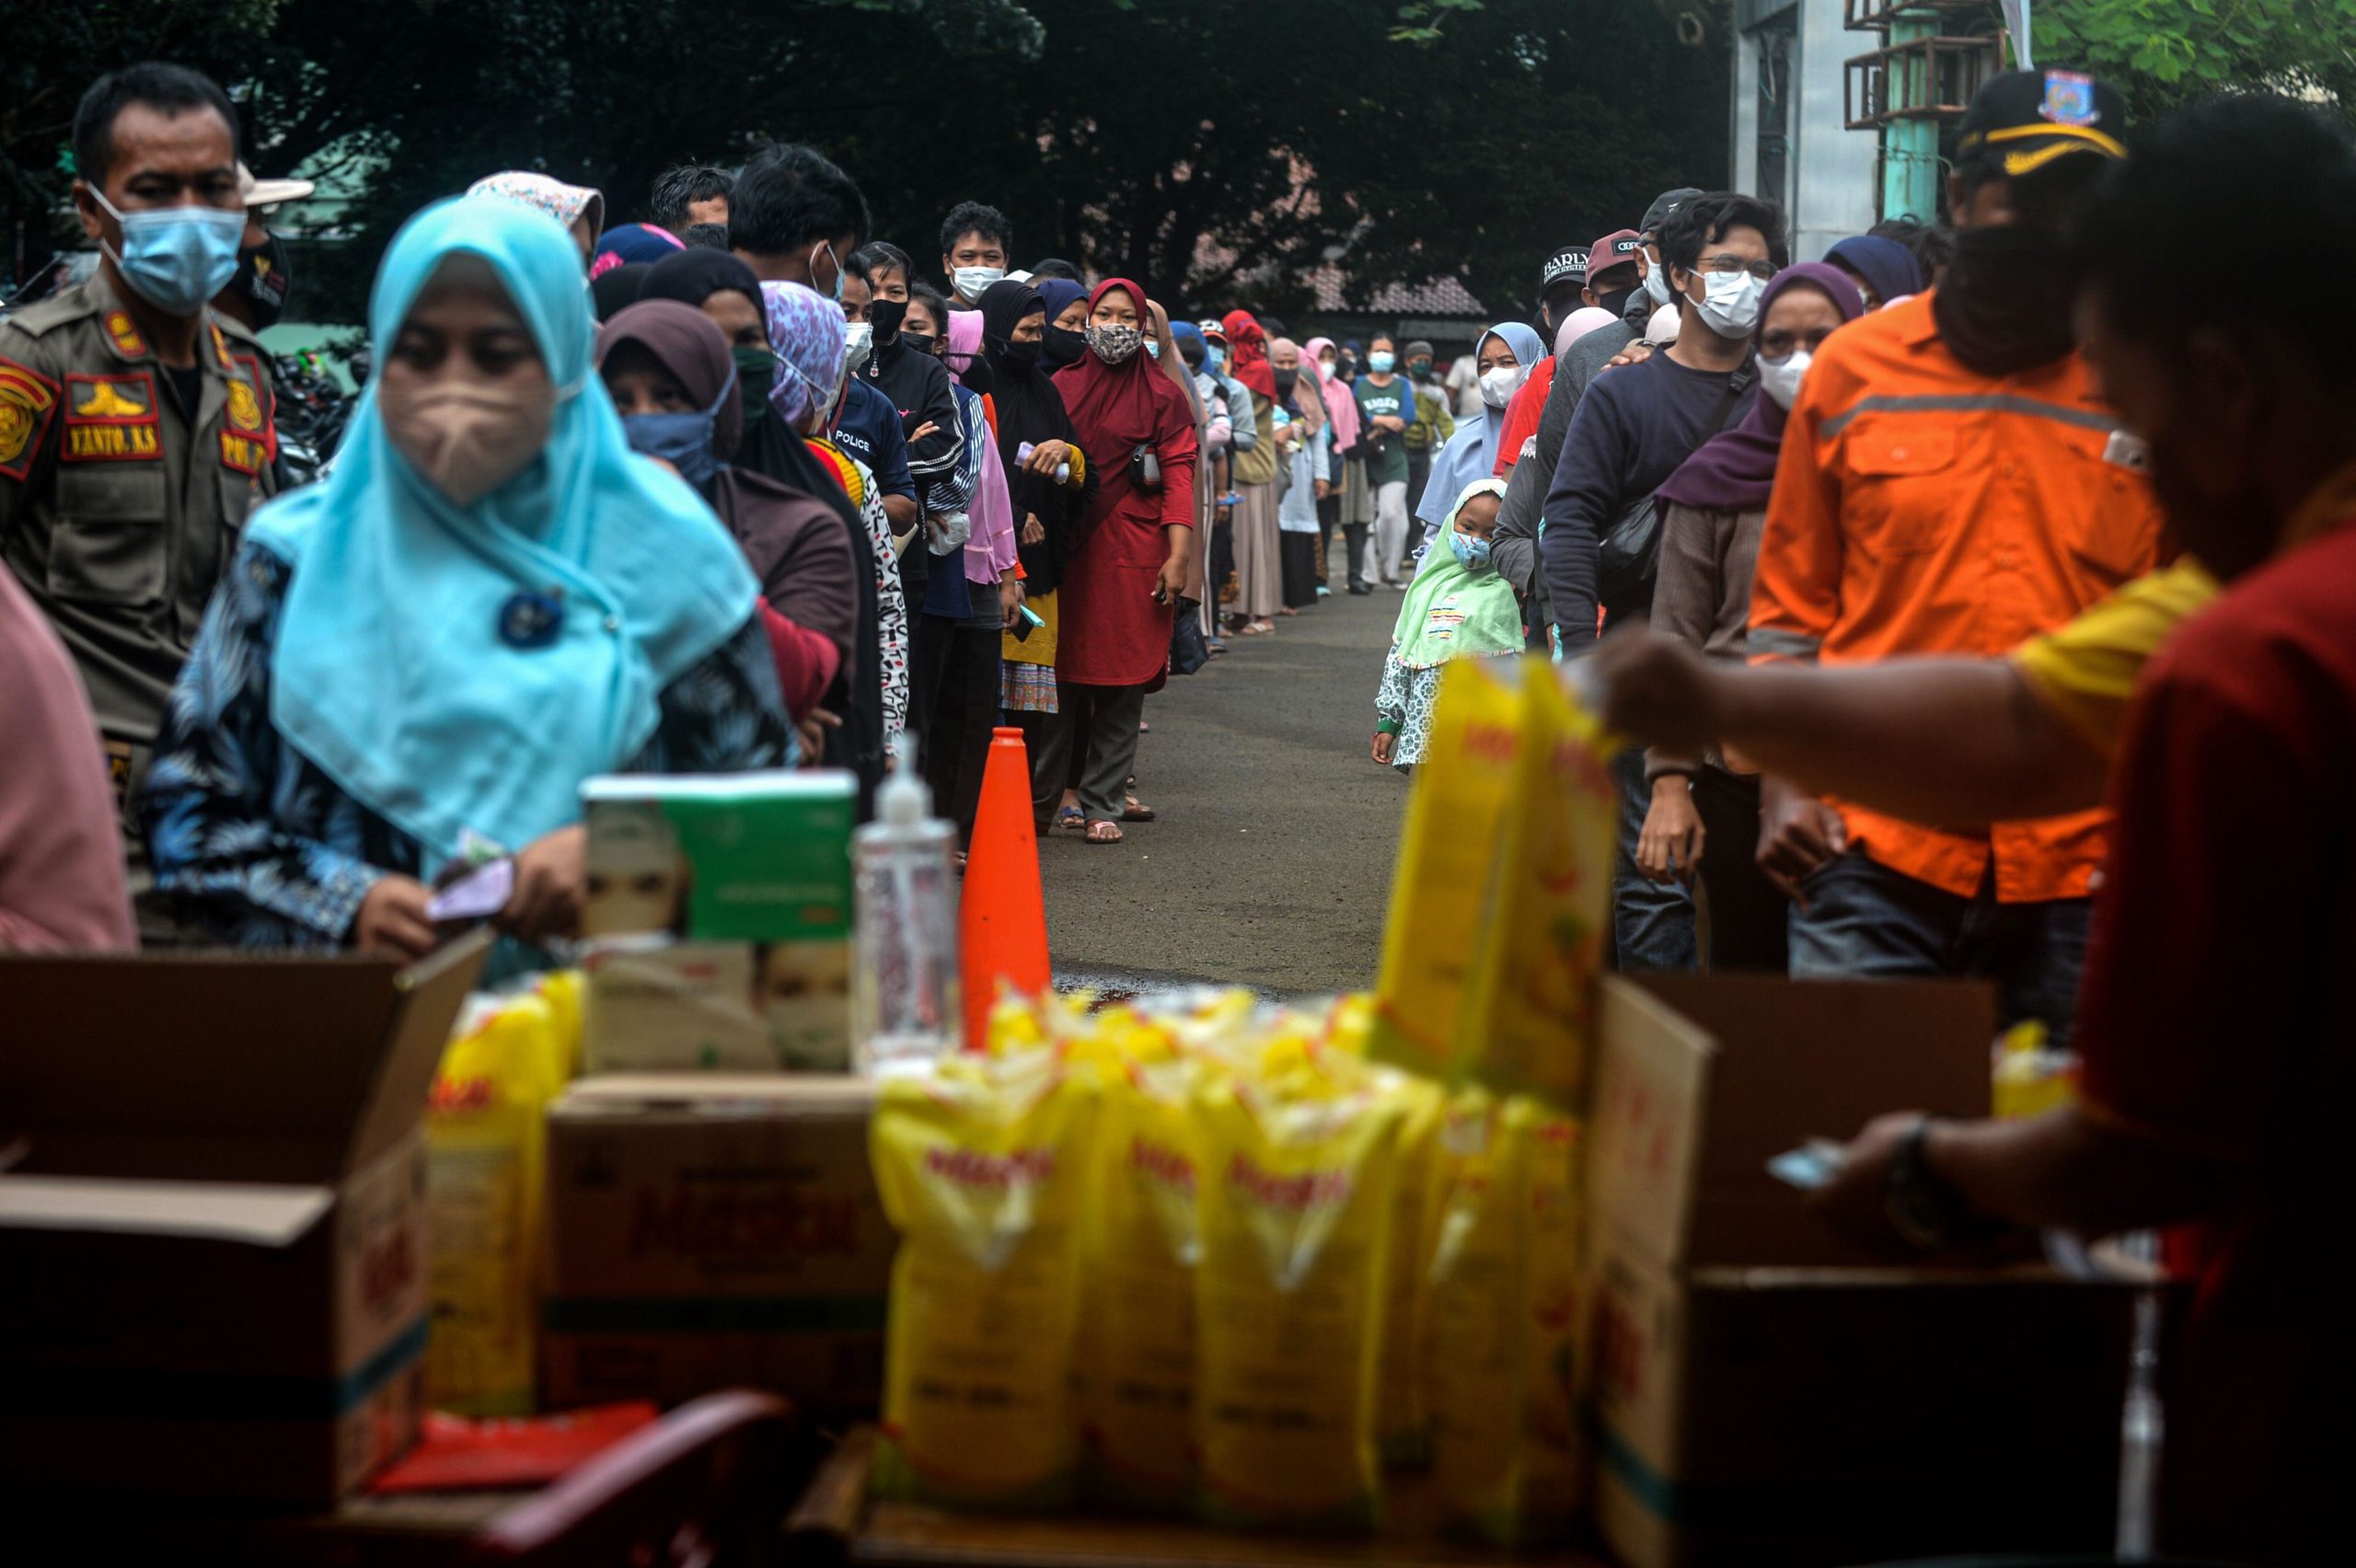 Long queues of people waiting for packets of cooking oil